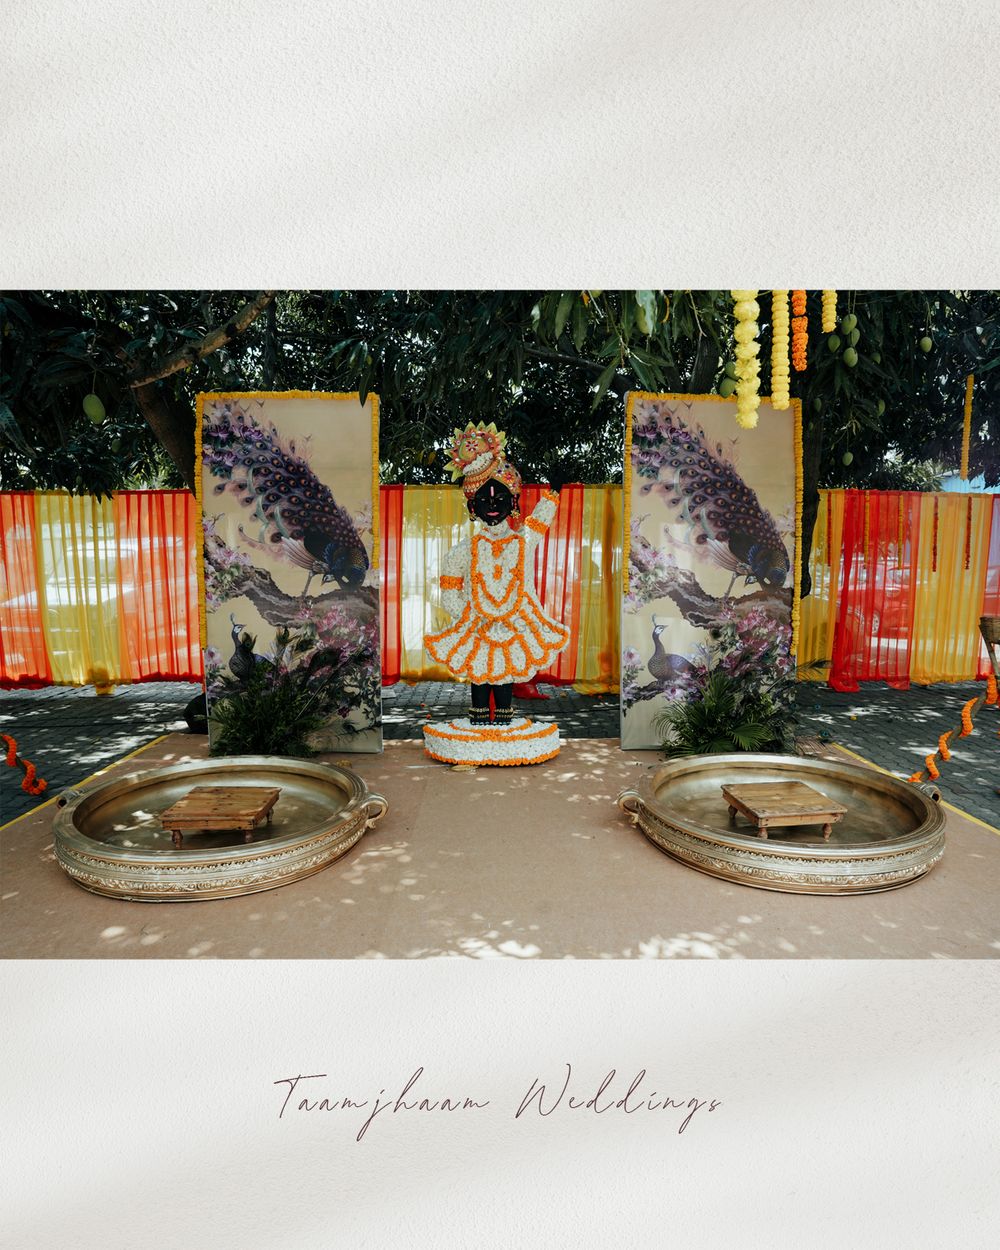 Photo From Gold Finch - By TaamJhaam Weddings